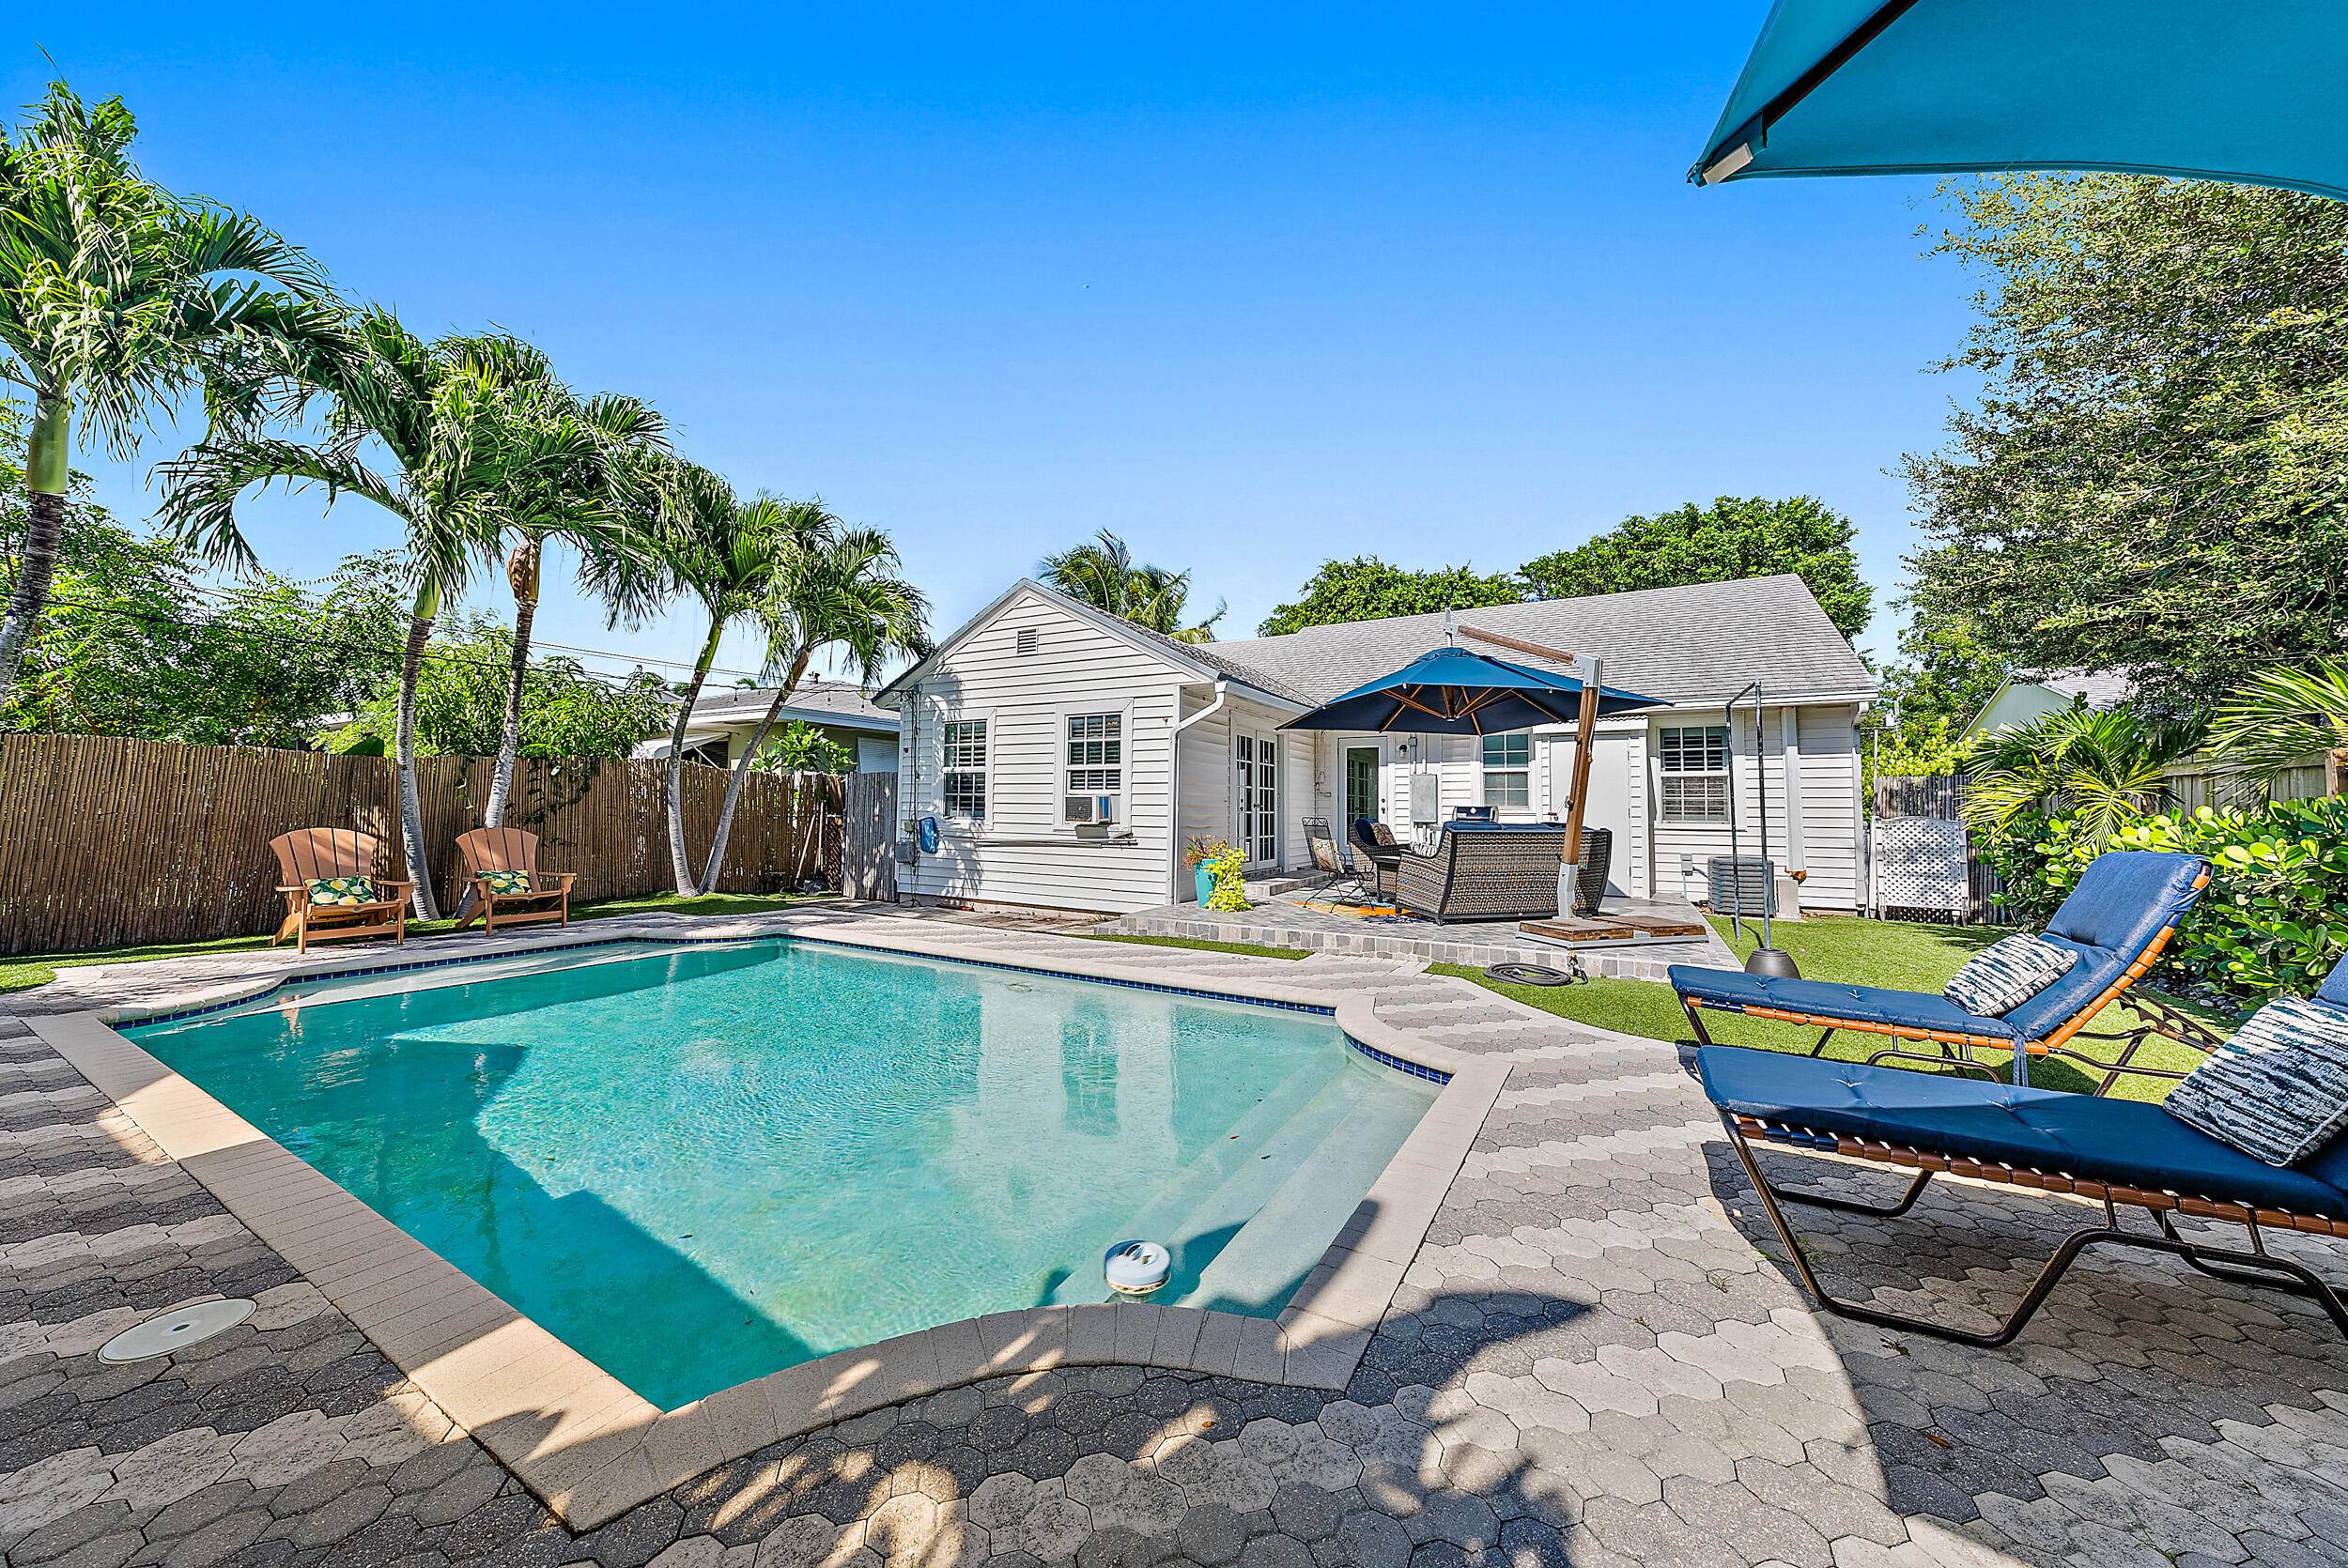 This three bedroom, two bathroom home with an ultra private pool and lush backyard.